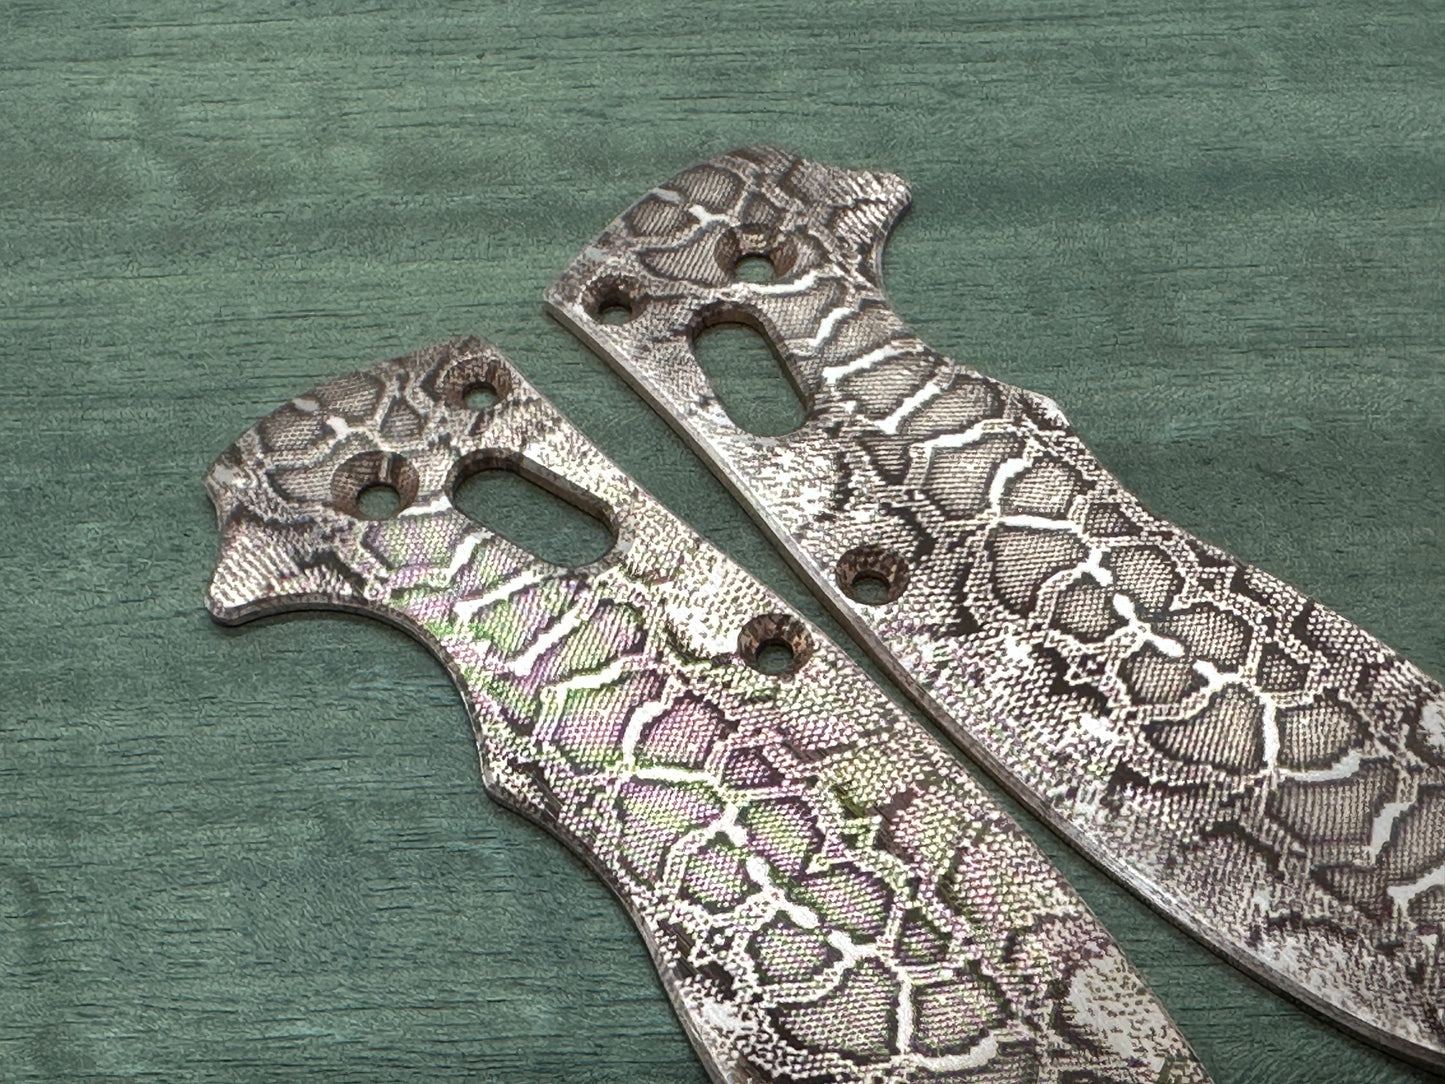 REPTILIAN engraved Copper scales for Spyderco MANIX 2